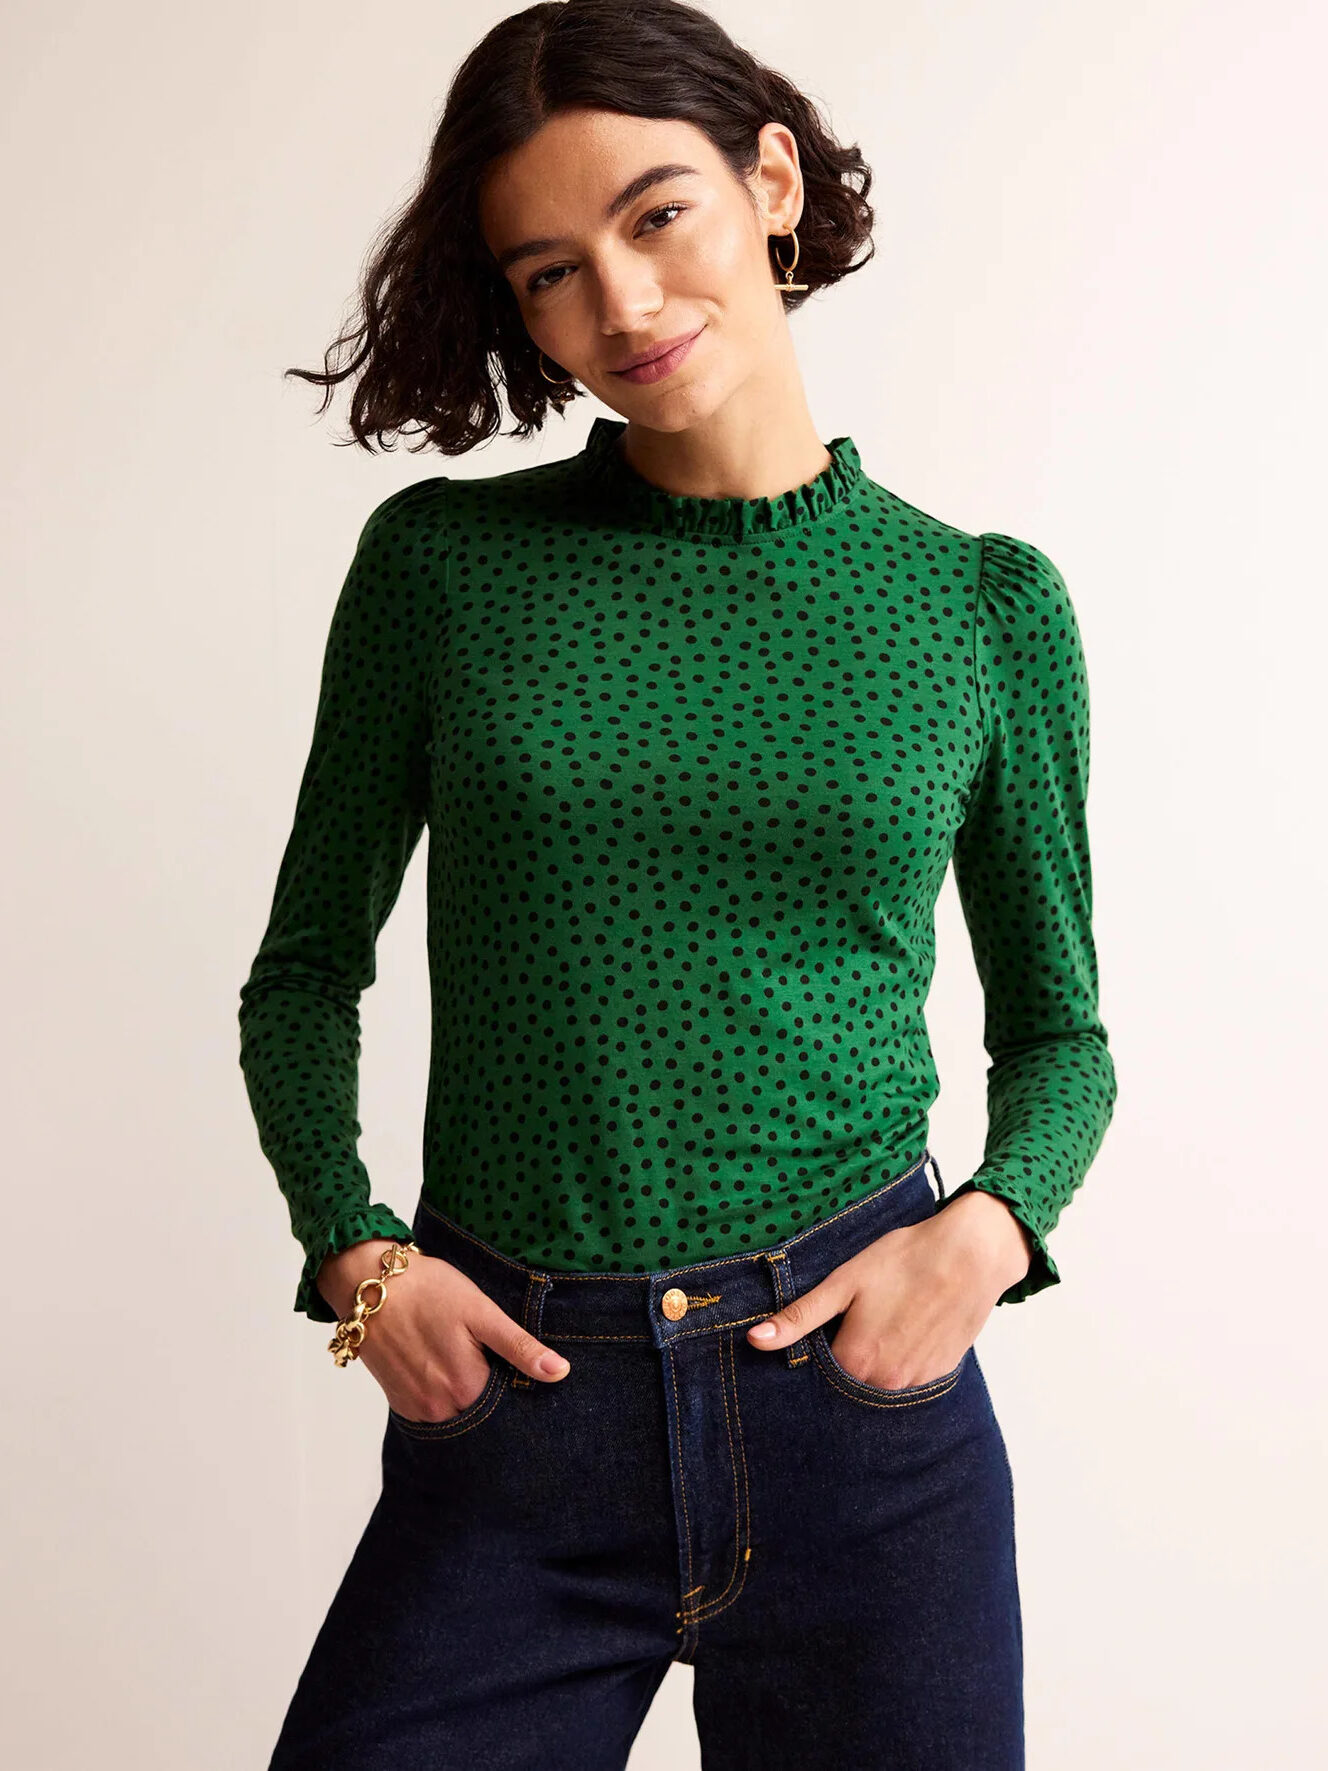 A woman wearing a green polka dot top and jeans.